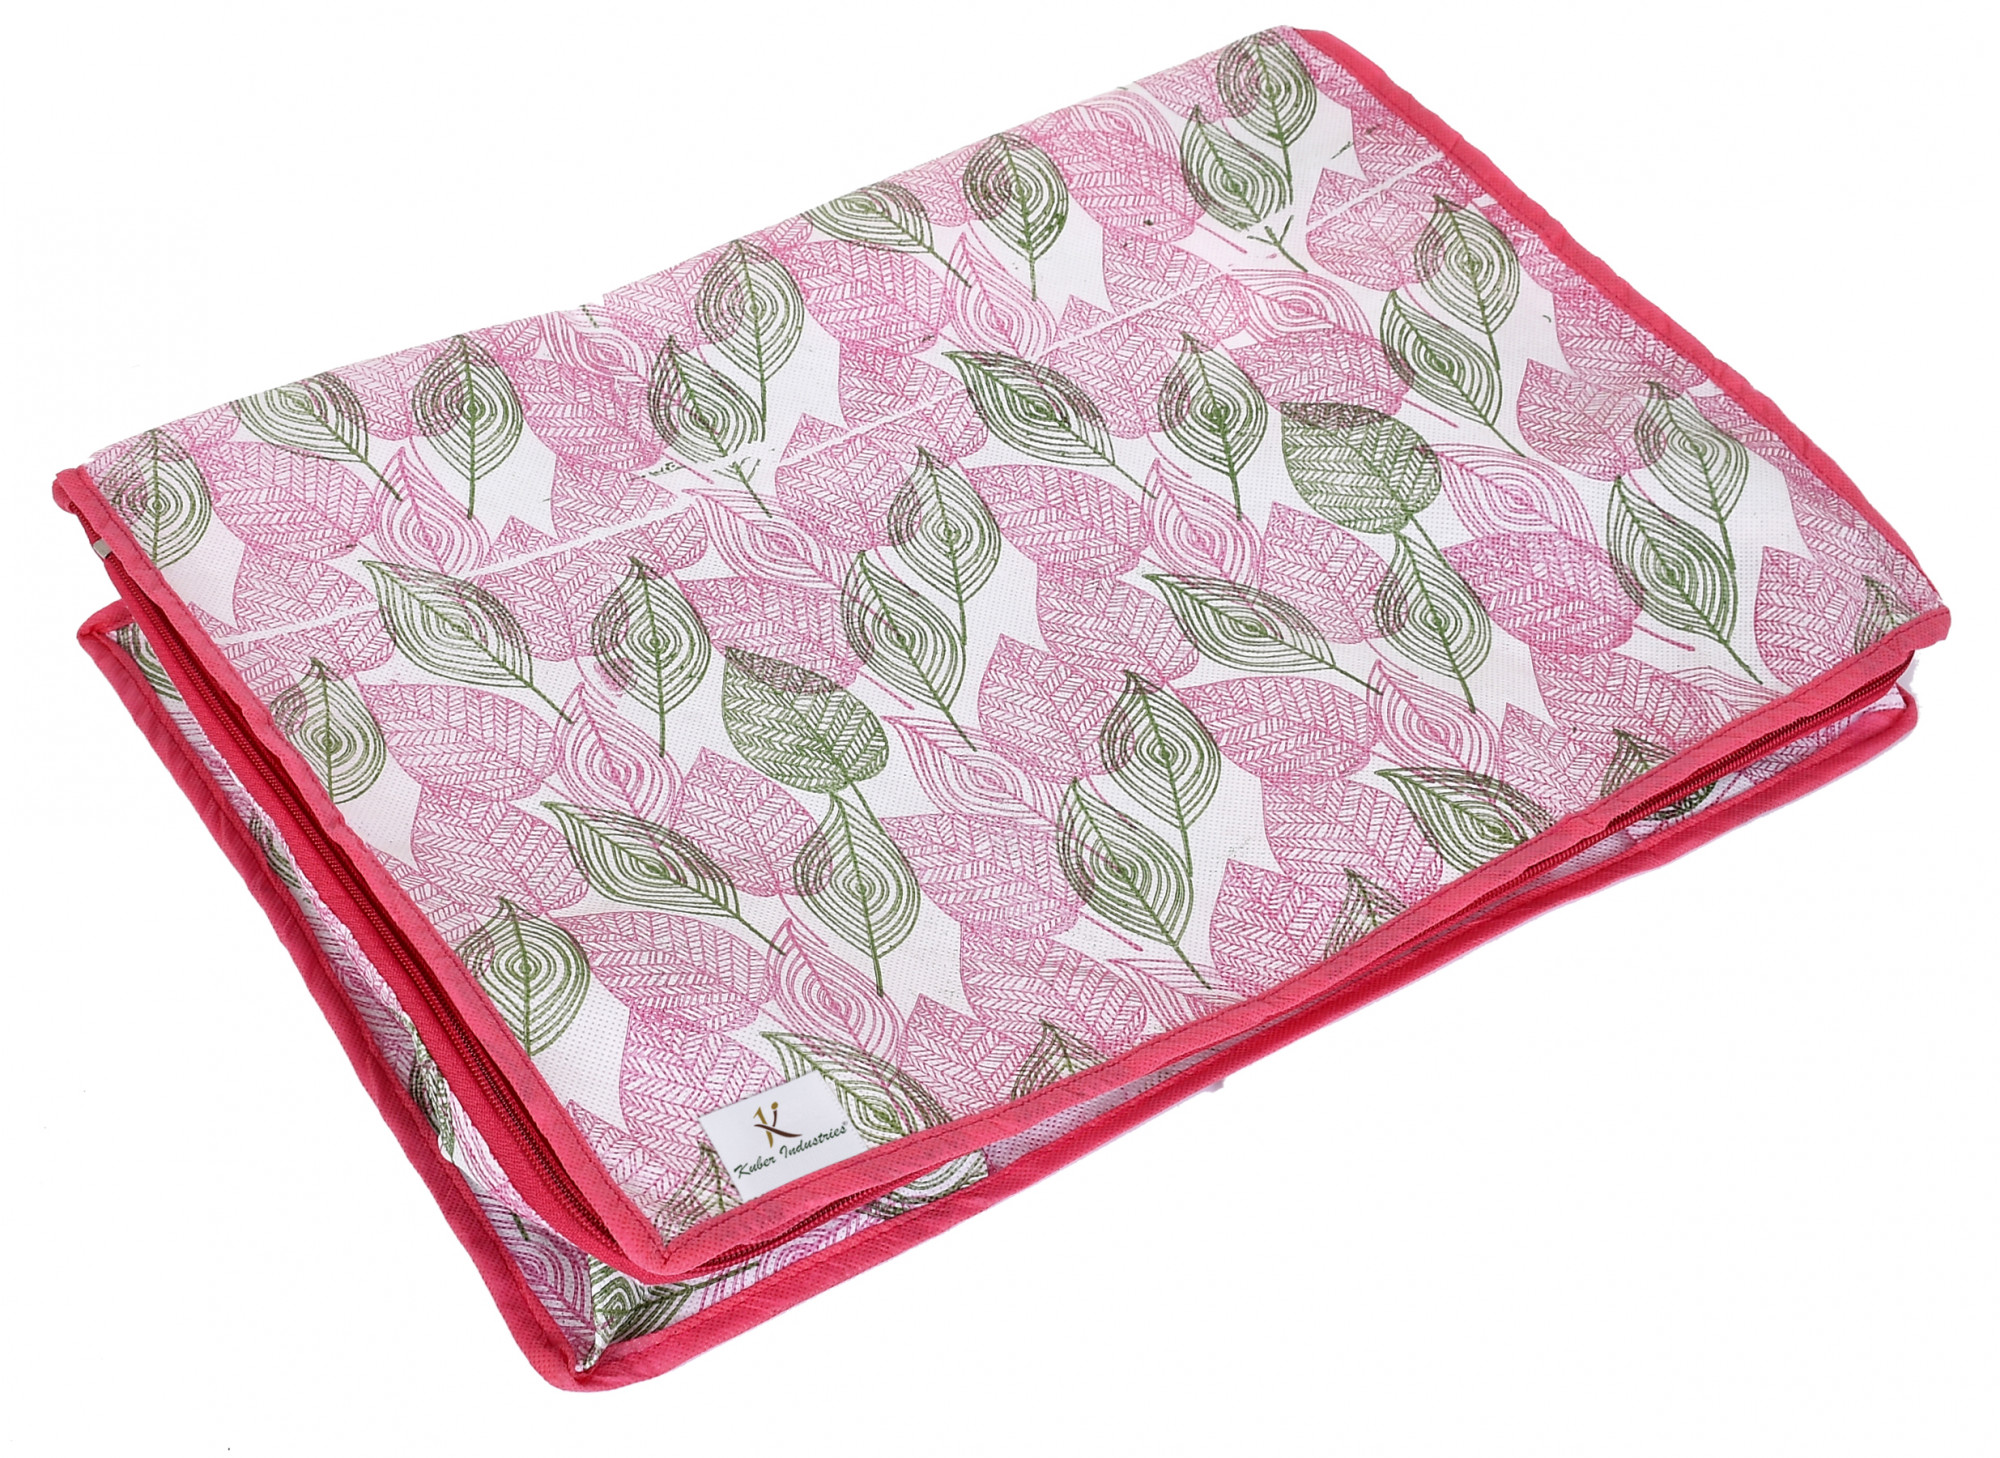 Kuber Industries Metalic Leafy,Checkered Print Non Woven Underbed Storage Bag,Cloth Organiser,Blanket Cover with Transparent Window (Pink & Ivory)-34_S_KUBMART16631